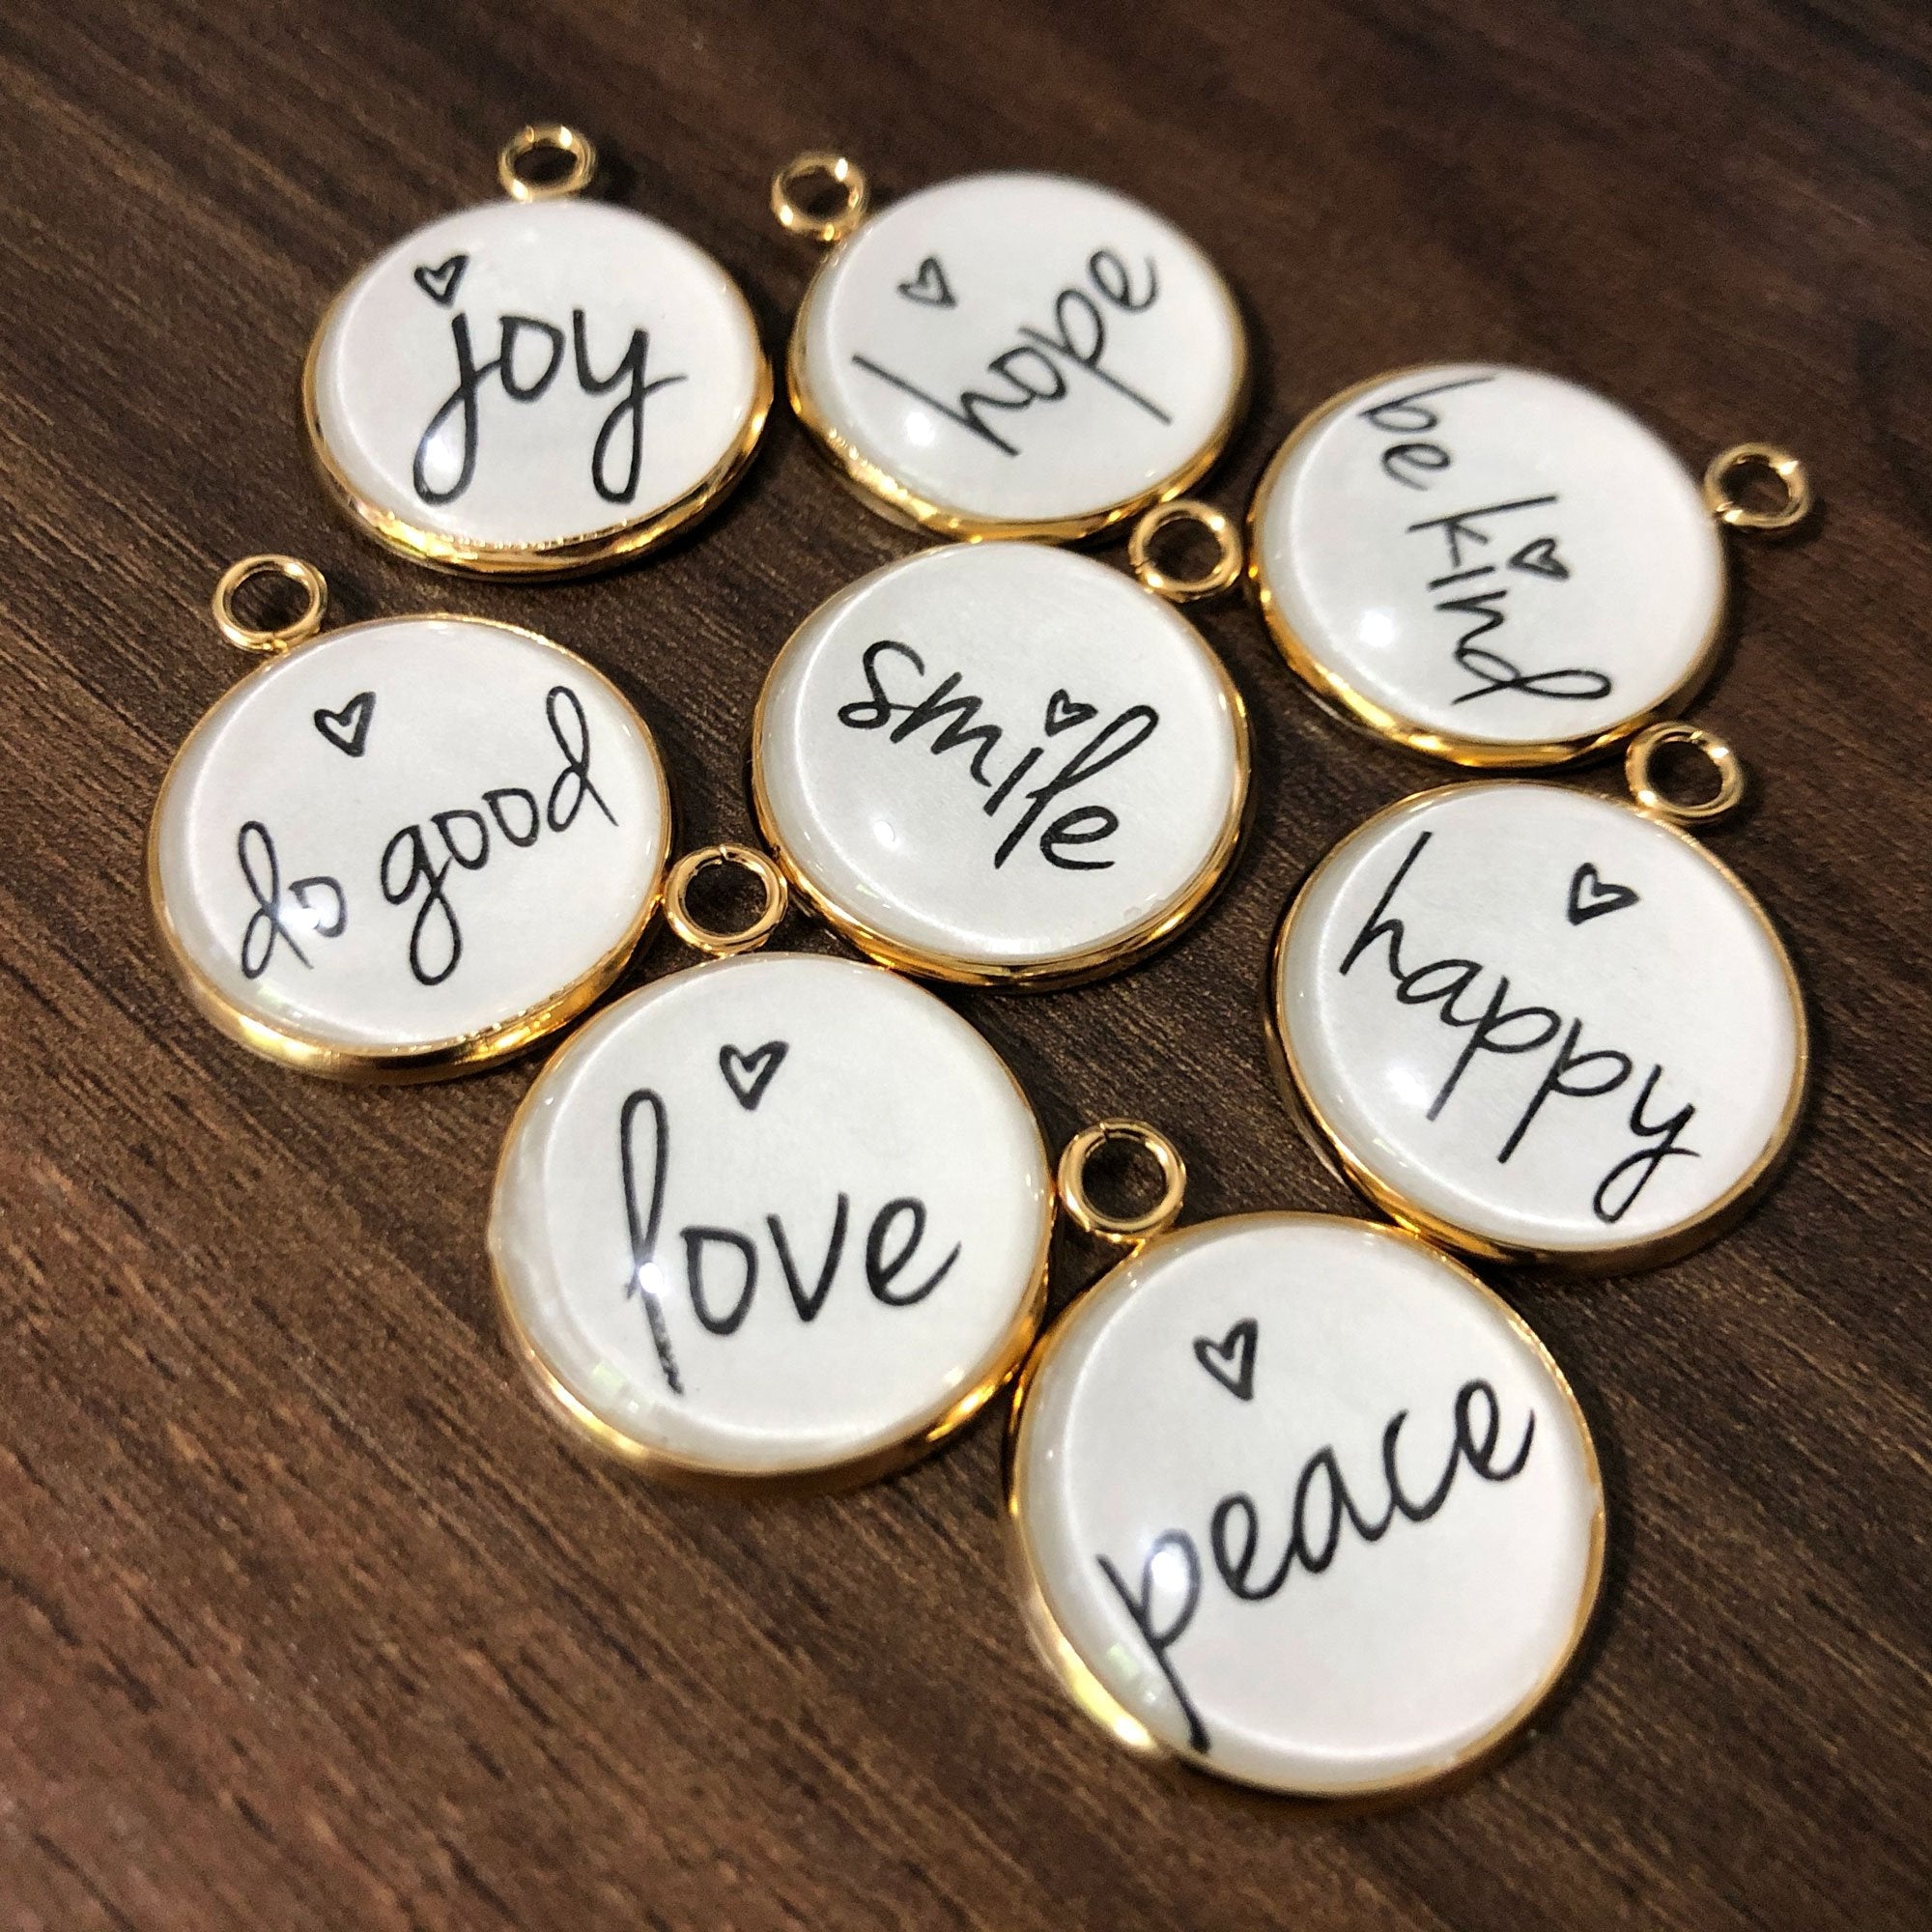 Colorful Positivity & Heart Charms Set - Spread Joy, Love, and Hope Bijou Her